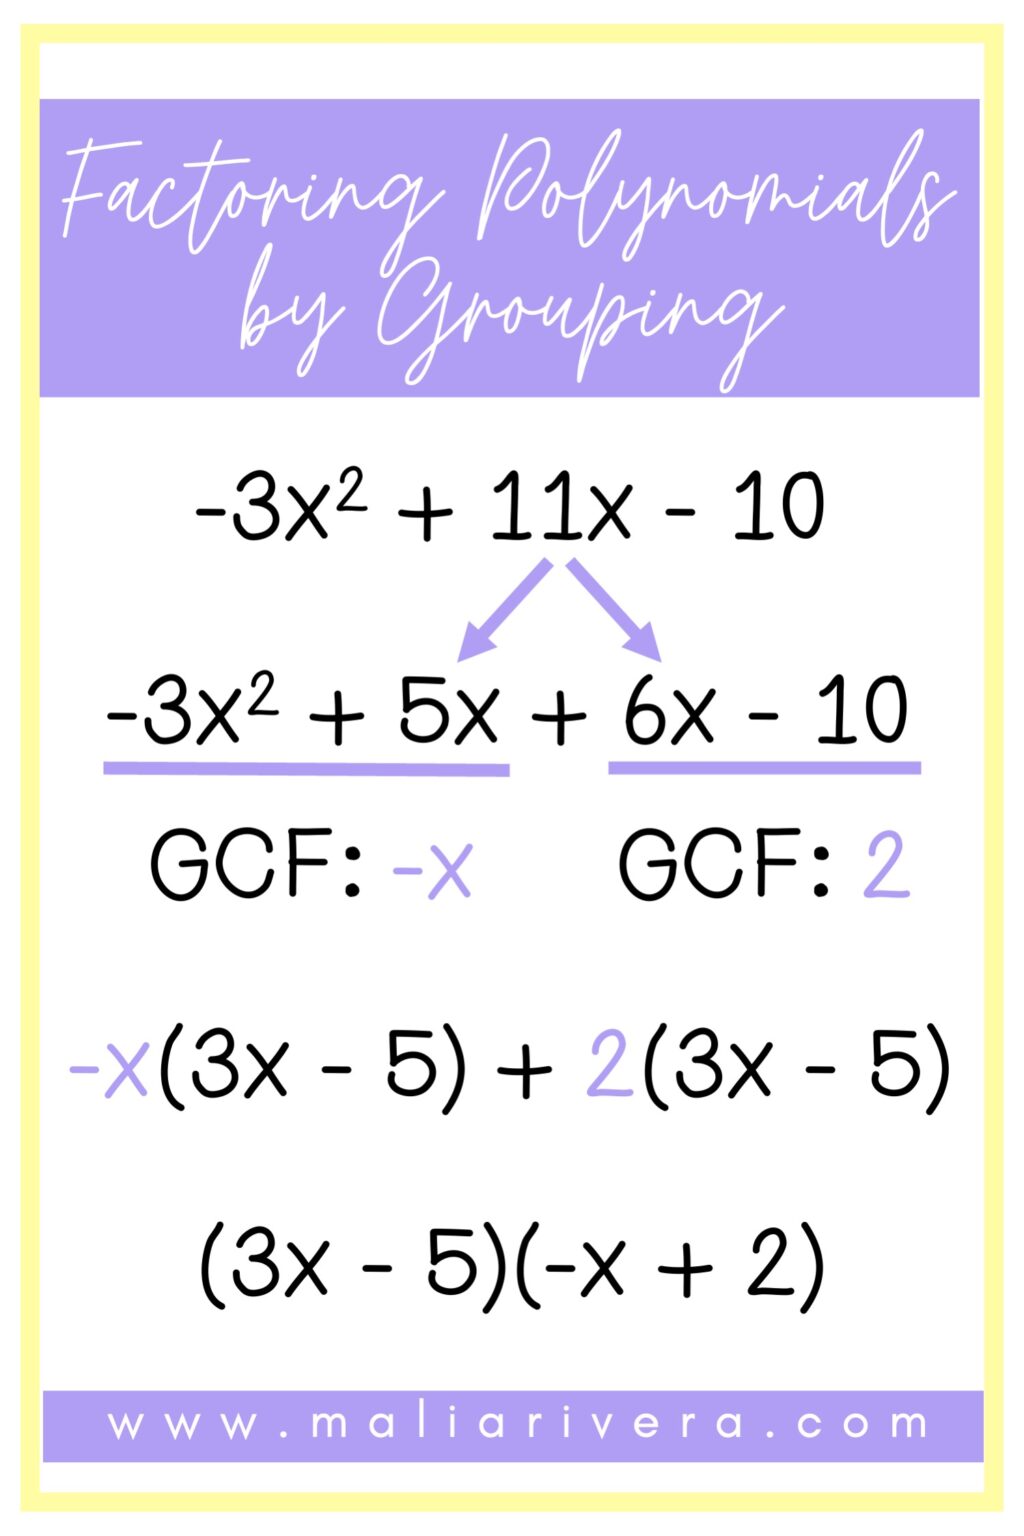 factoring polynomials completely assignment active